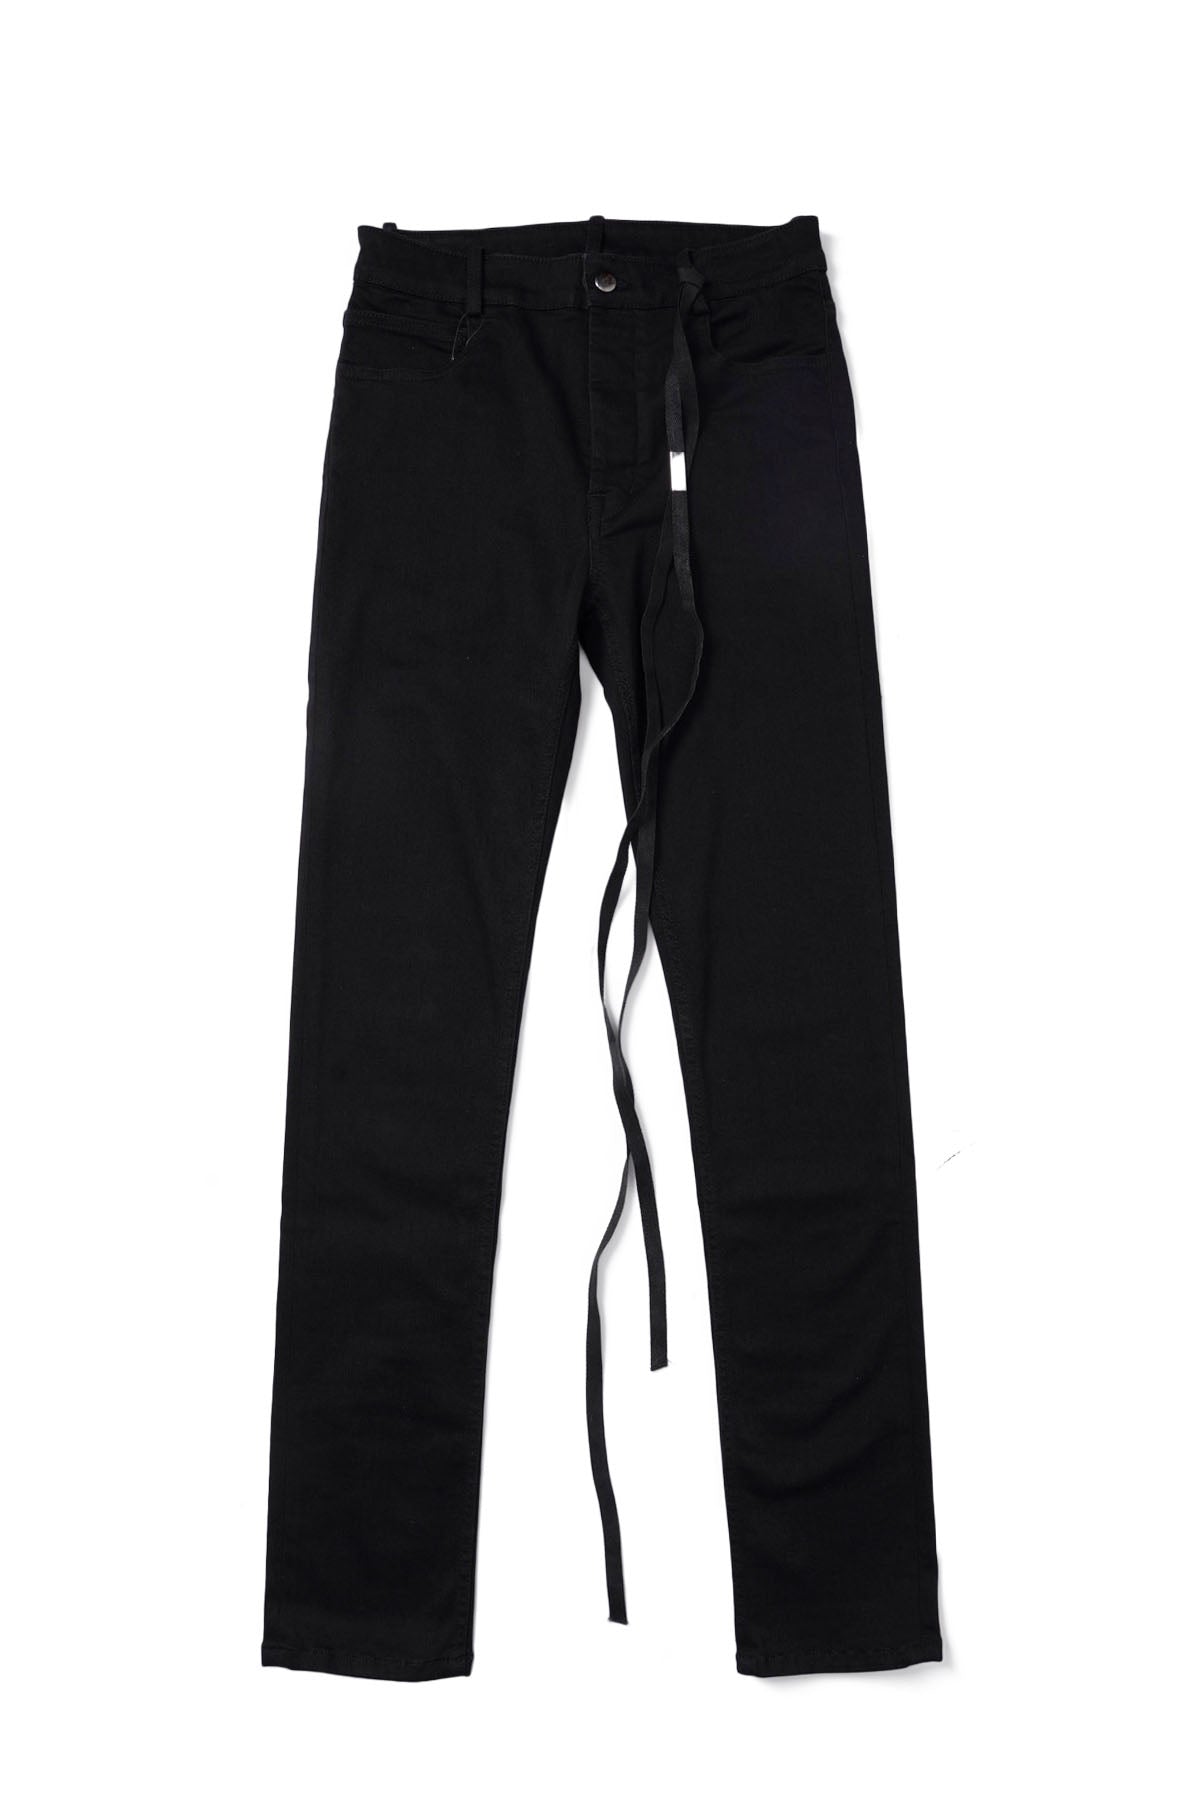 WOUT 5-POCKETS COMFORT SKINNY TROUSER